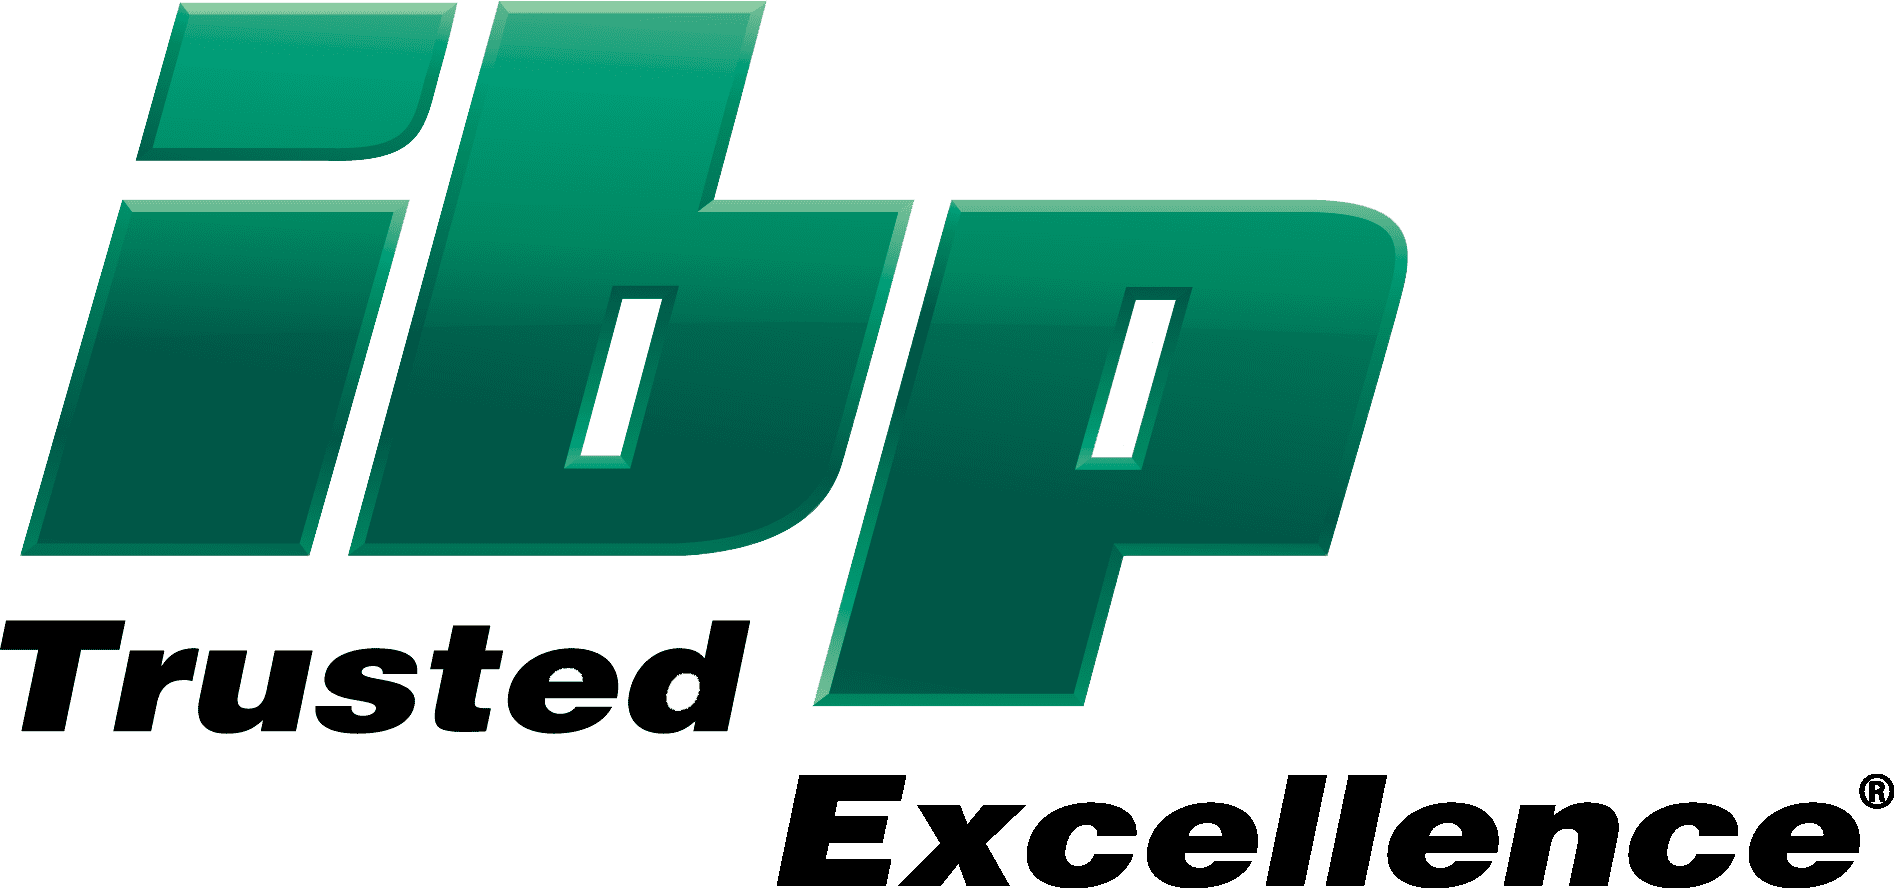 ibp trusted excellence logo